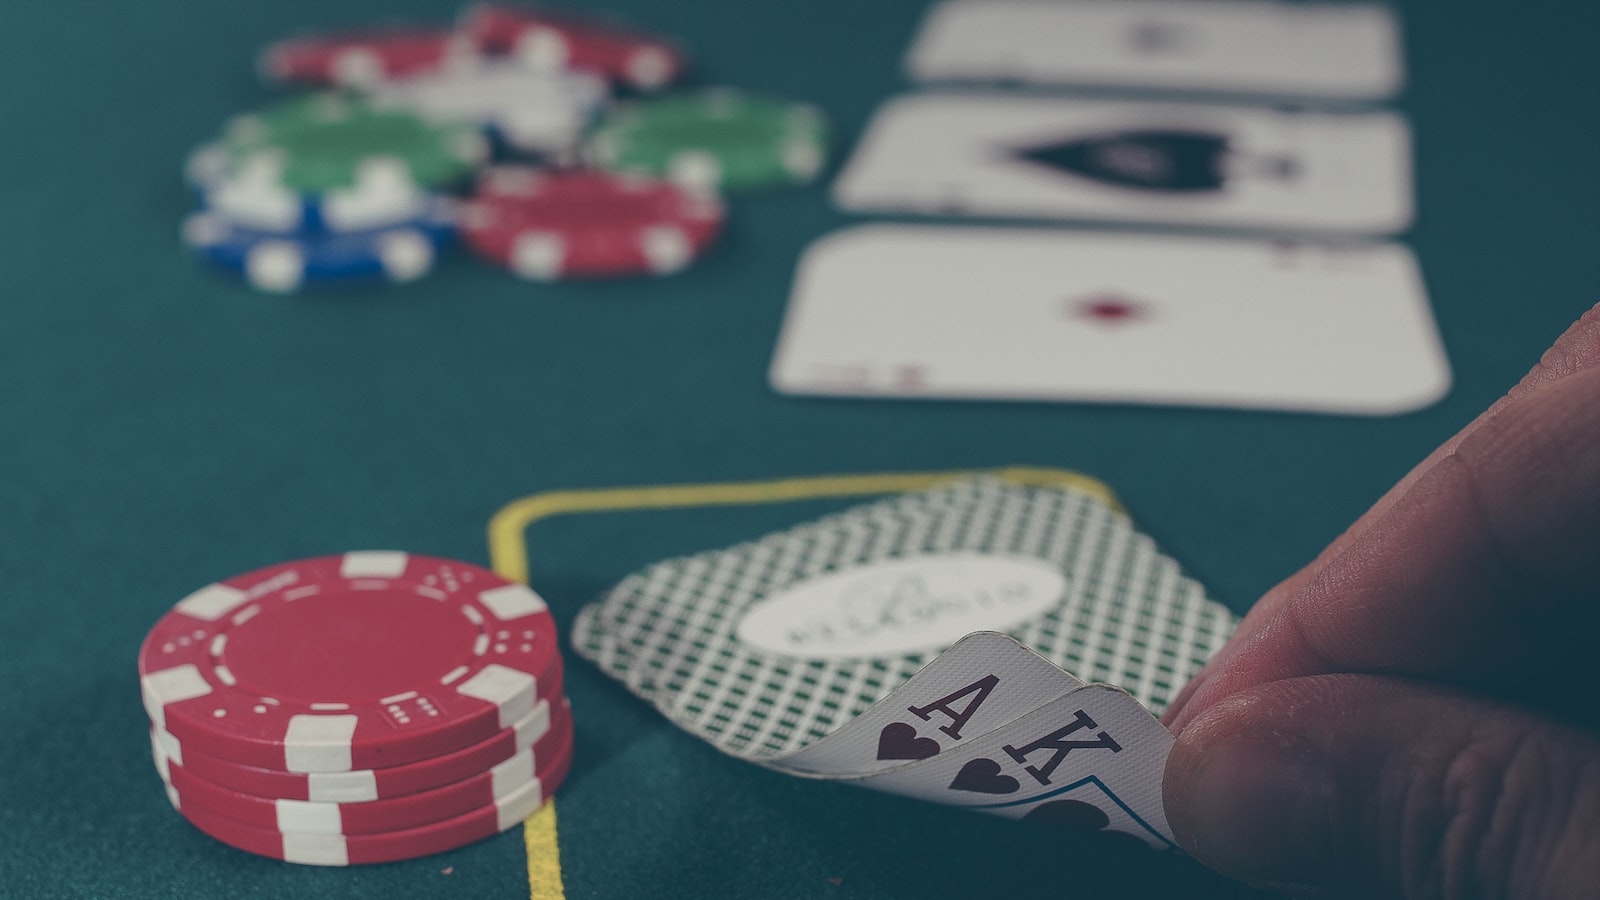 3. Safe and Secure Gambling: Online Casinos in Canada that Accept Mastercard